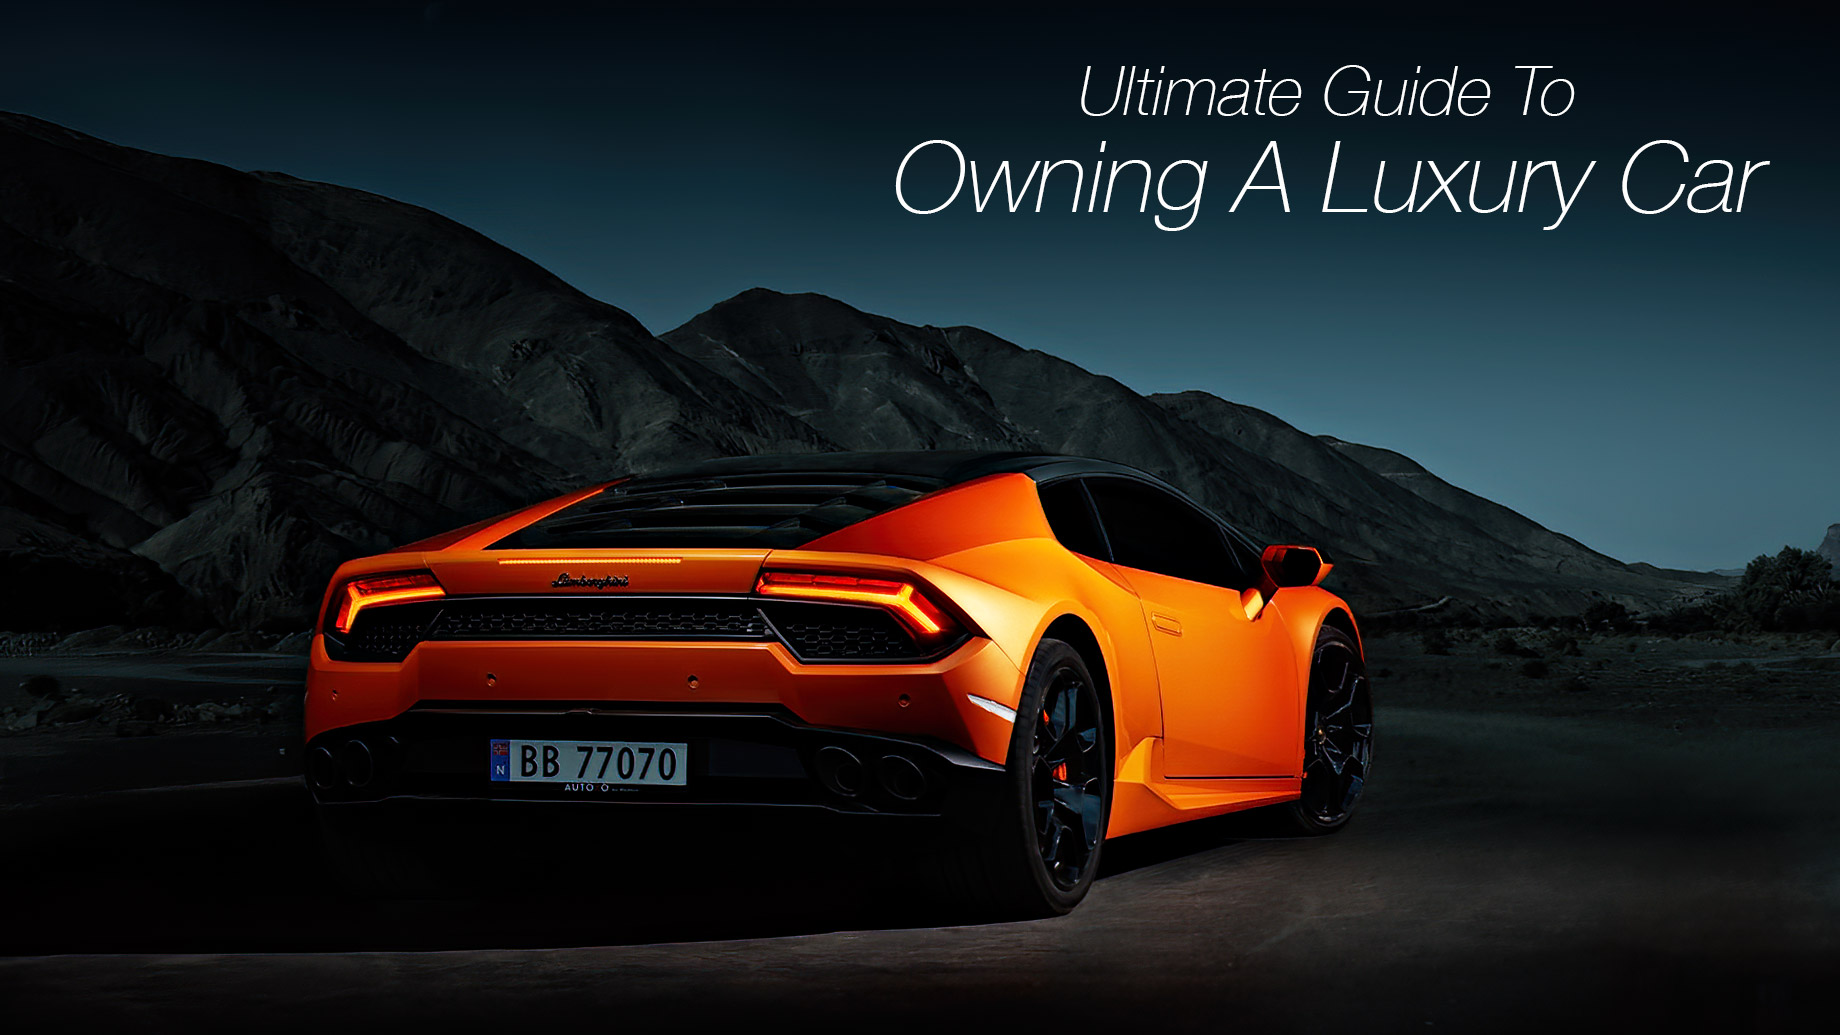 Ultimate Guide To Owning A Luxury Car